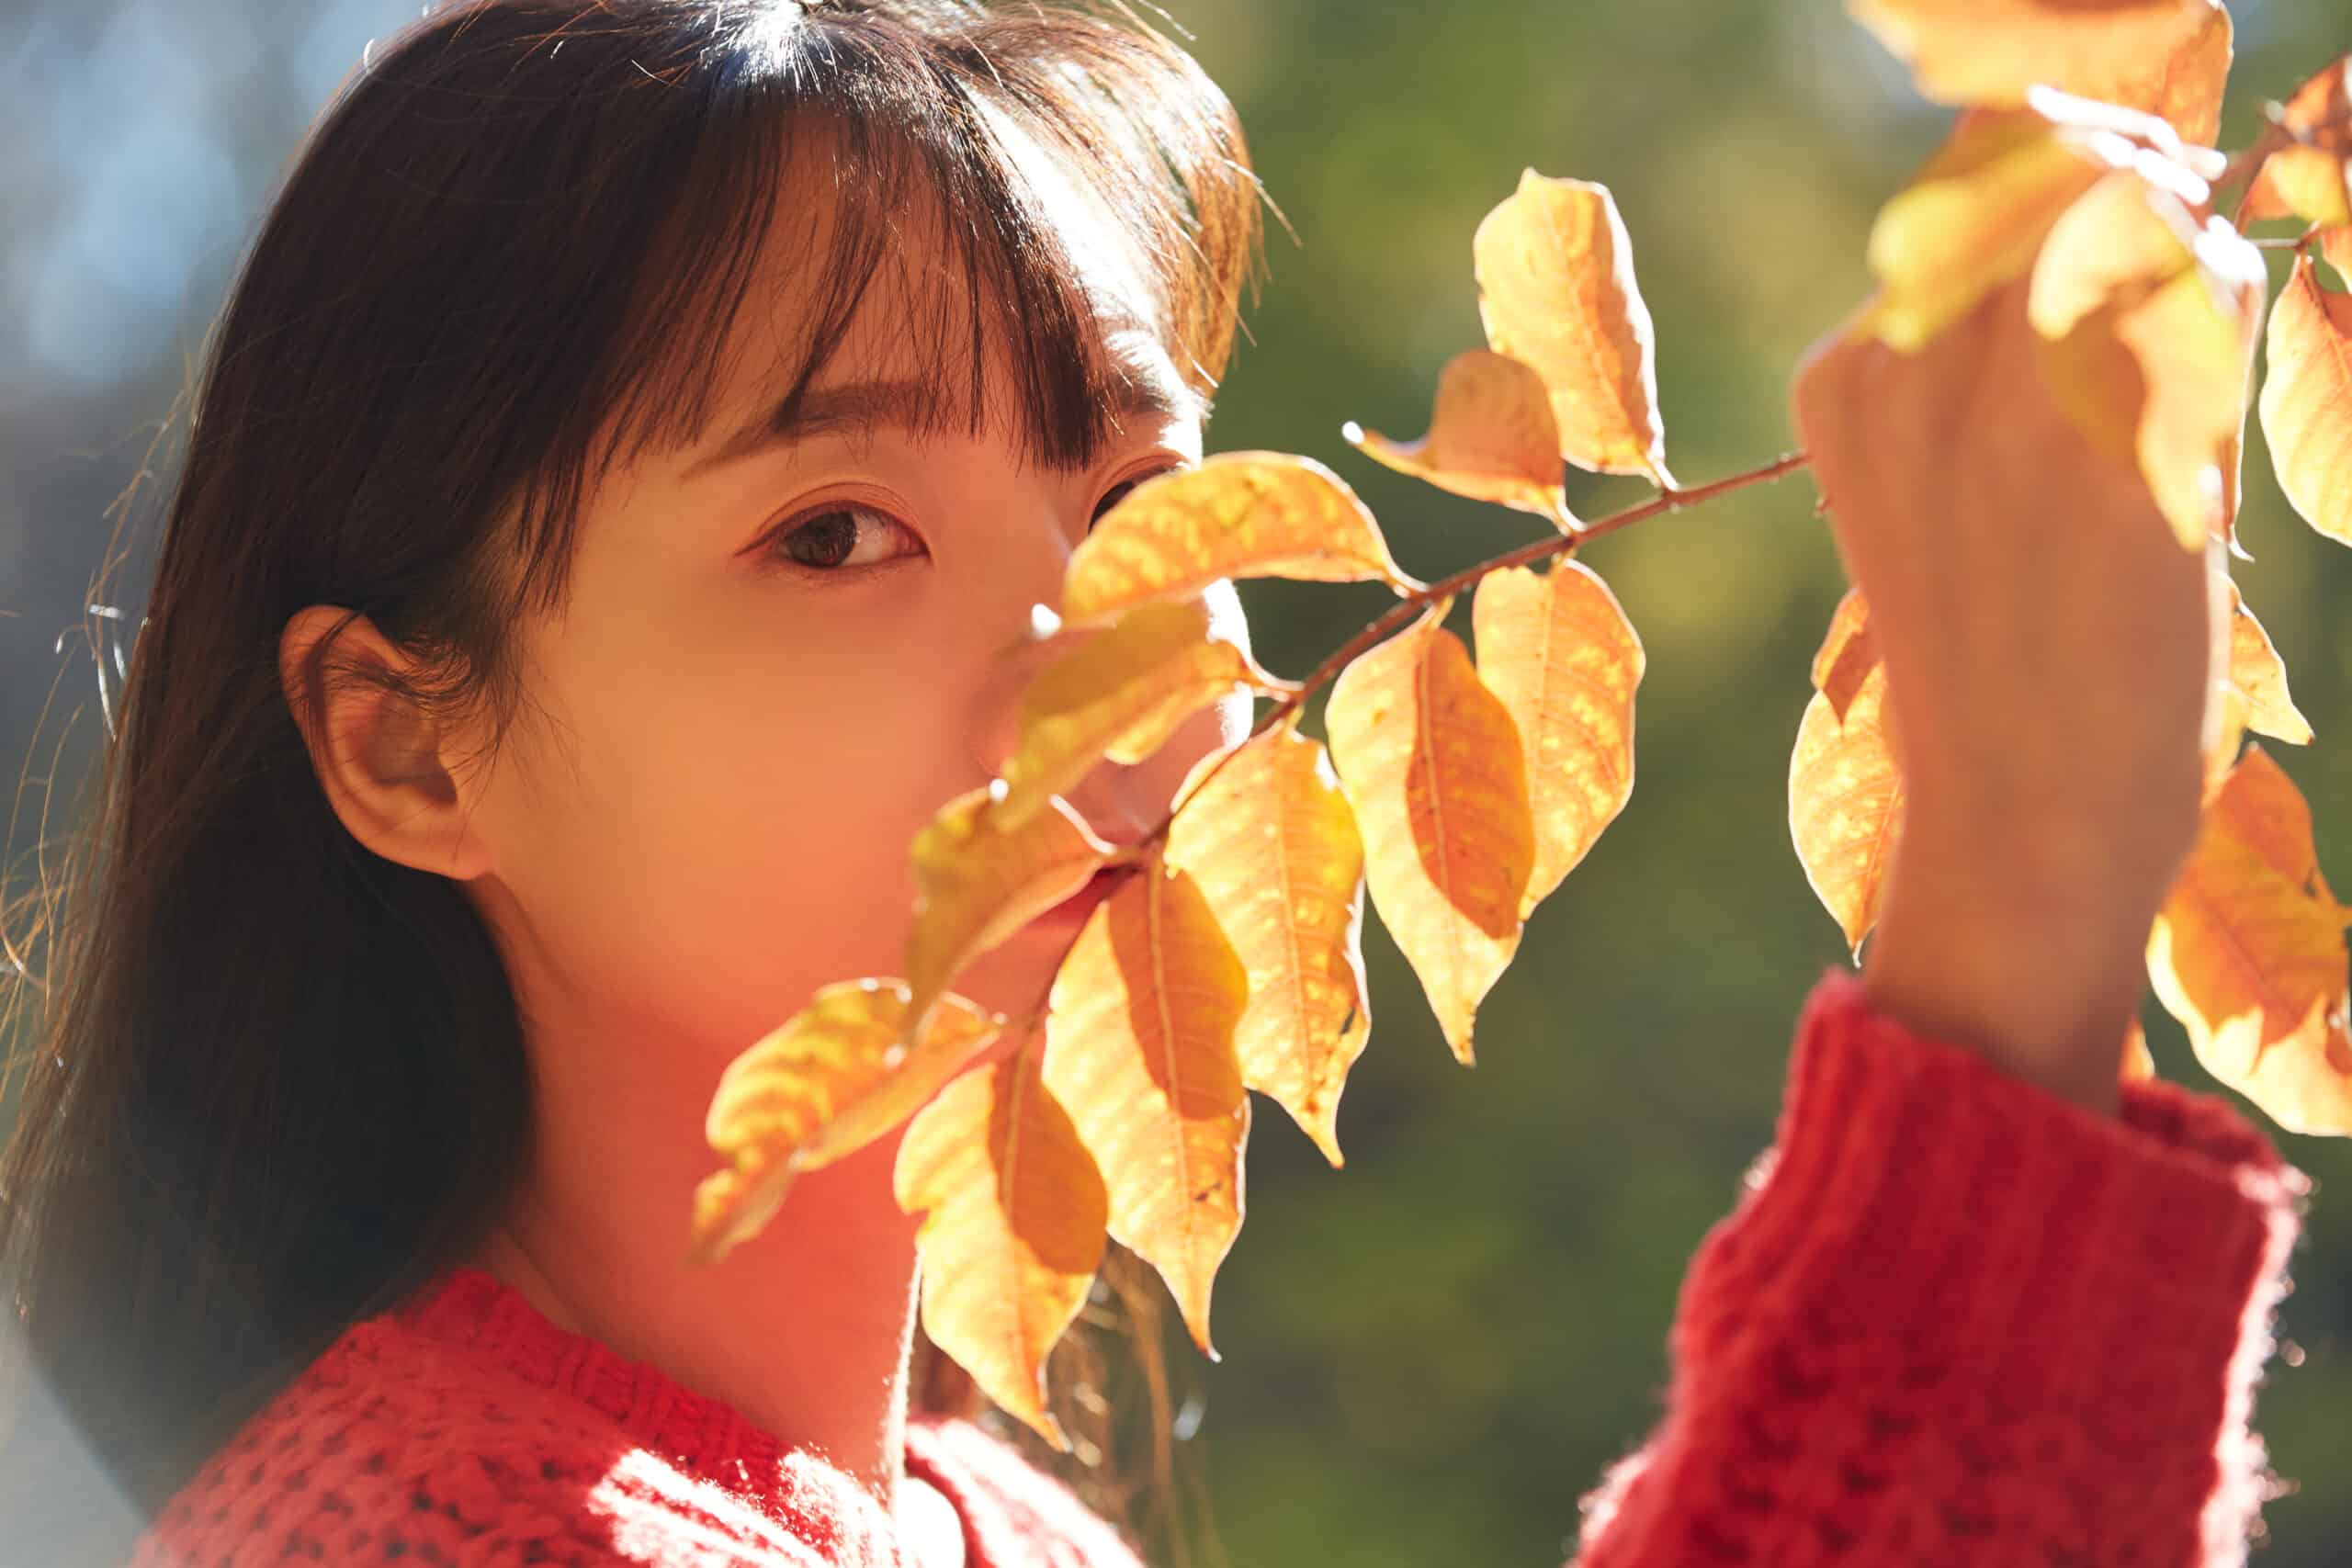 Japanese girl face hidden behind the leaves on a twig